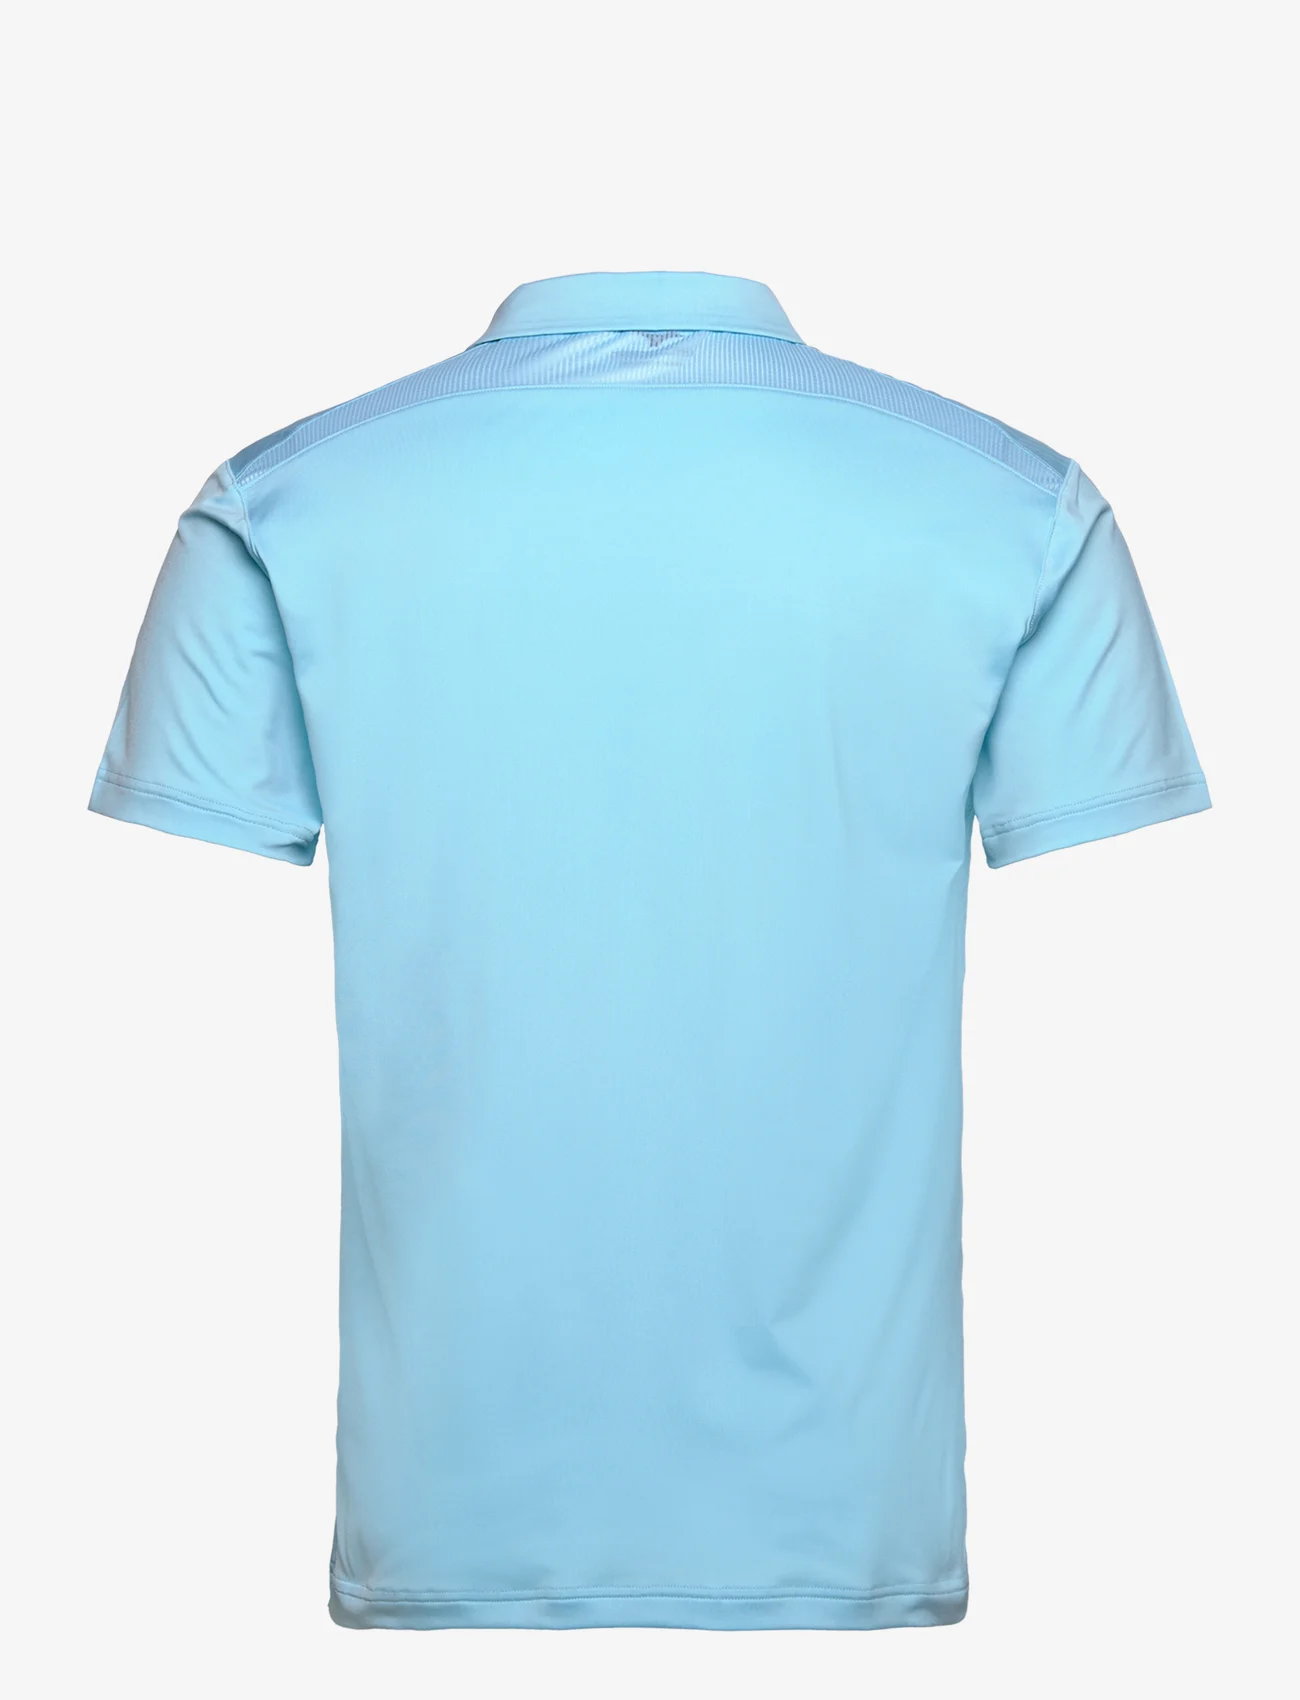 Mizuno - Charge Shadow Polo(M) - short-sleeved polos - blue glow - 1